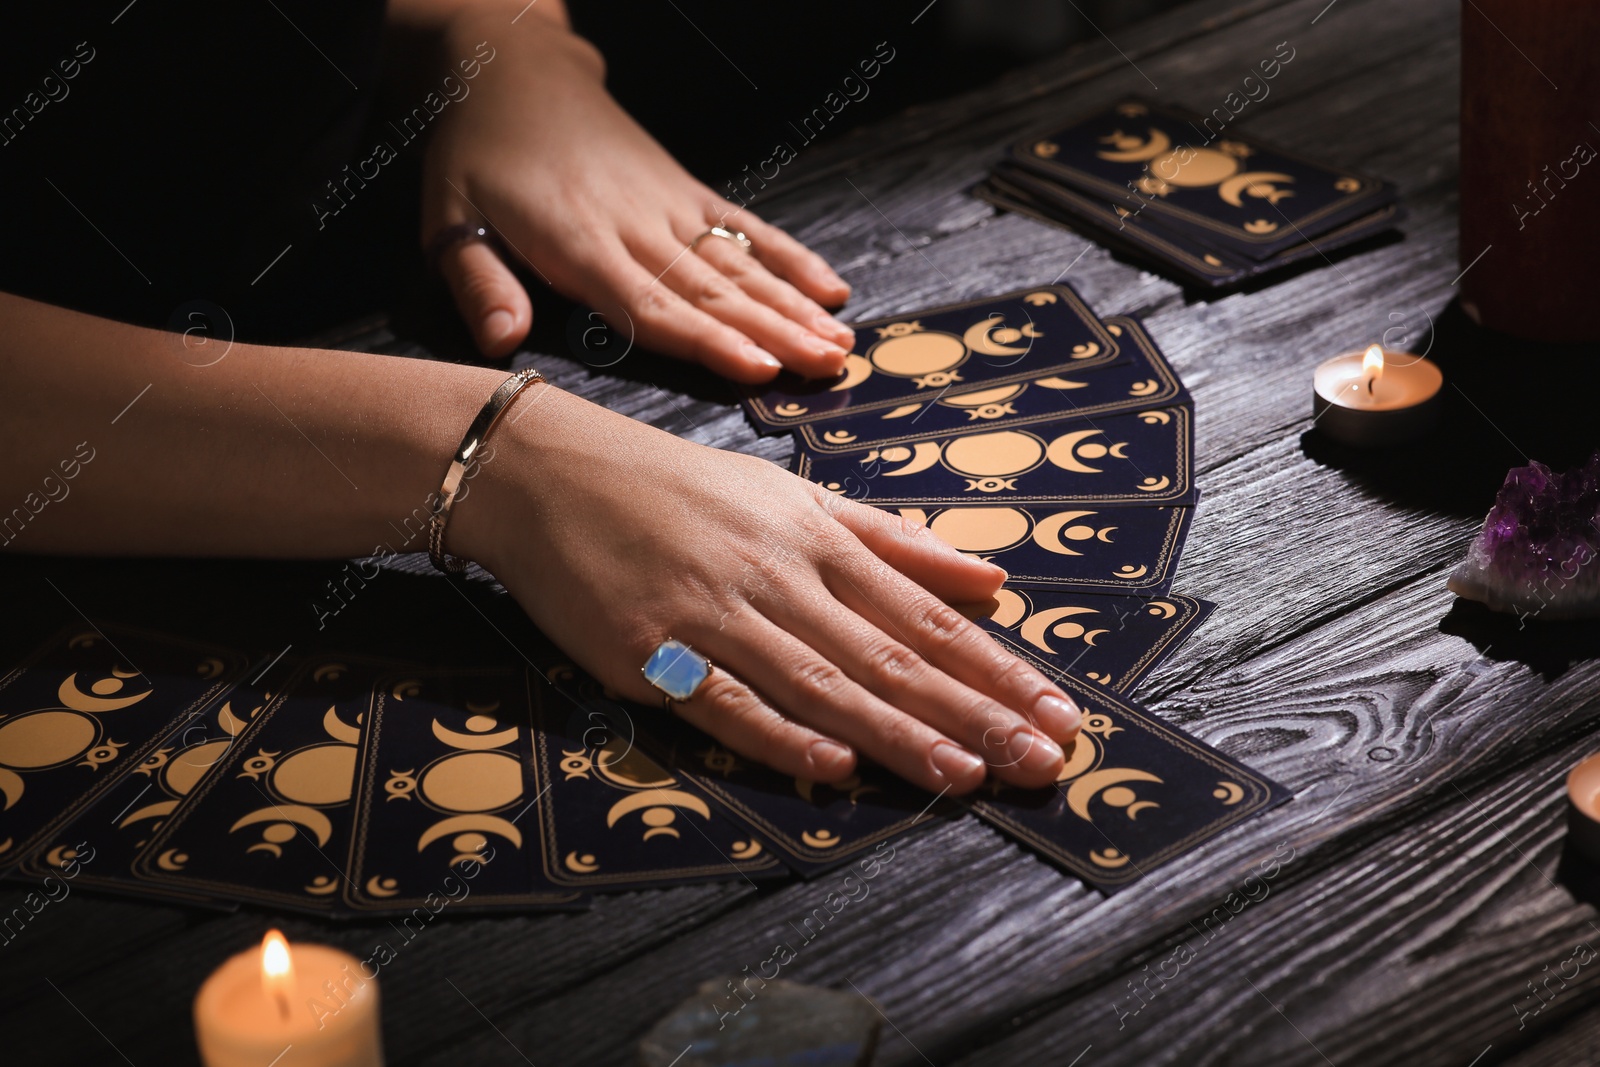 Photo of Soothsayer predicting future with tarot cards at table in darkness, closeup